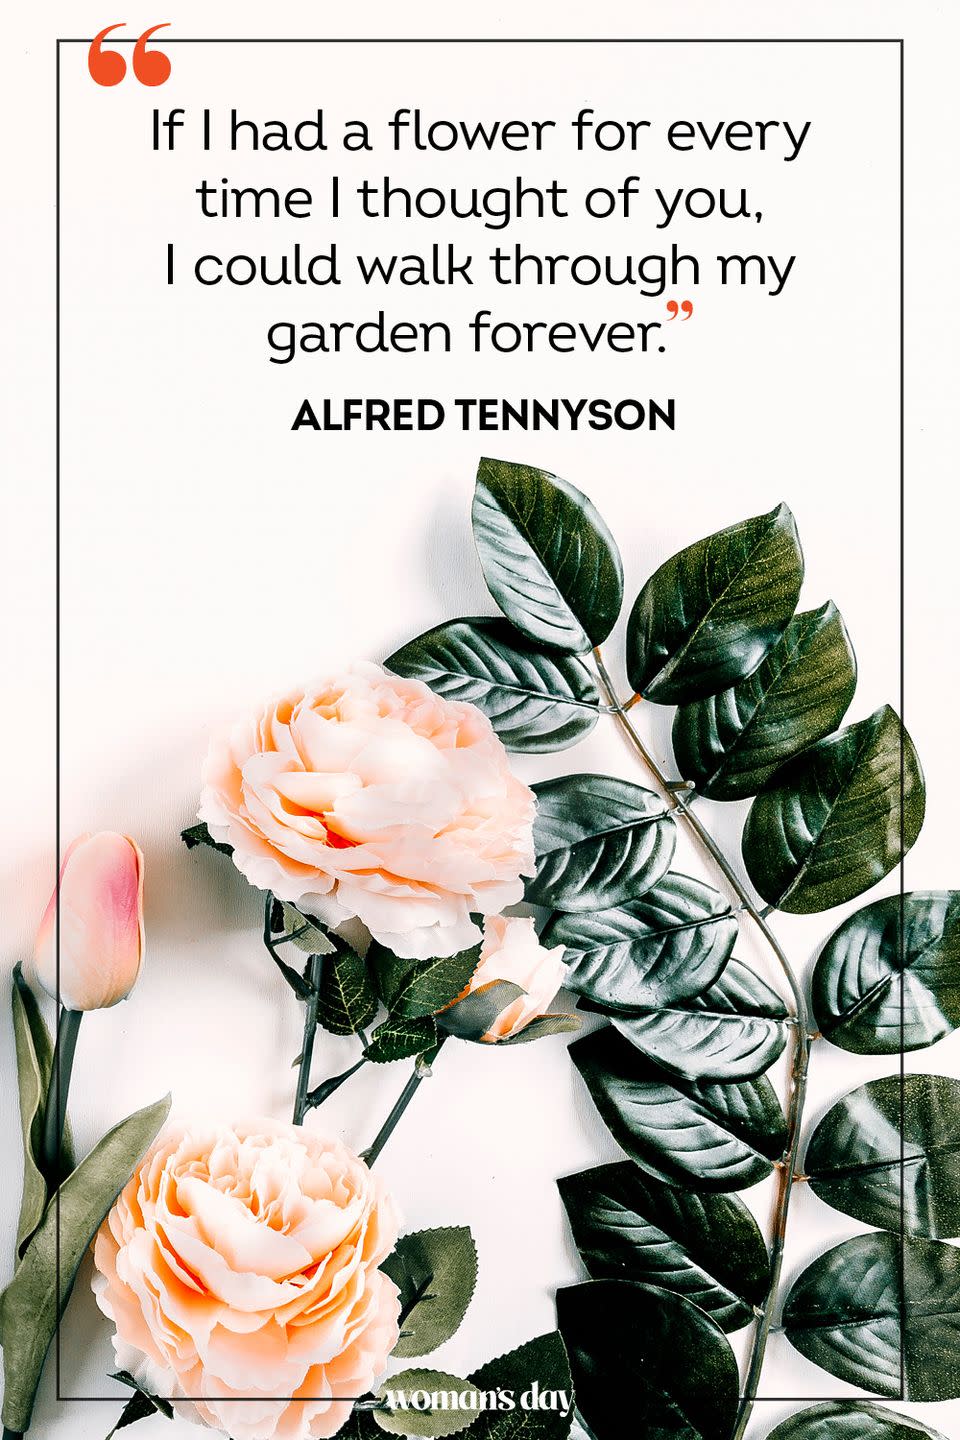 <p>“If I had a flower for every time I thought of you, I could walk through my garden forever.” — Alfred Tennyson</p>